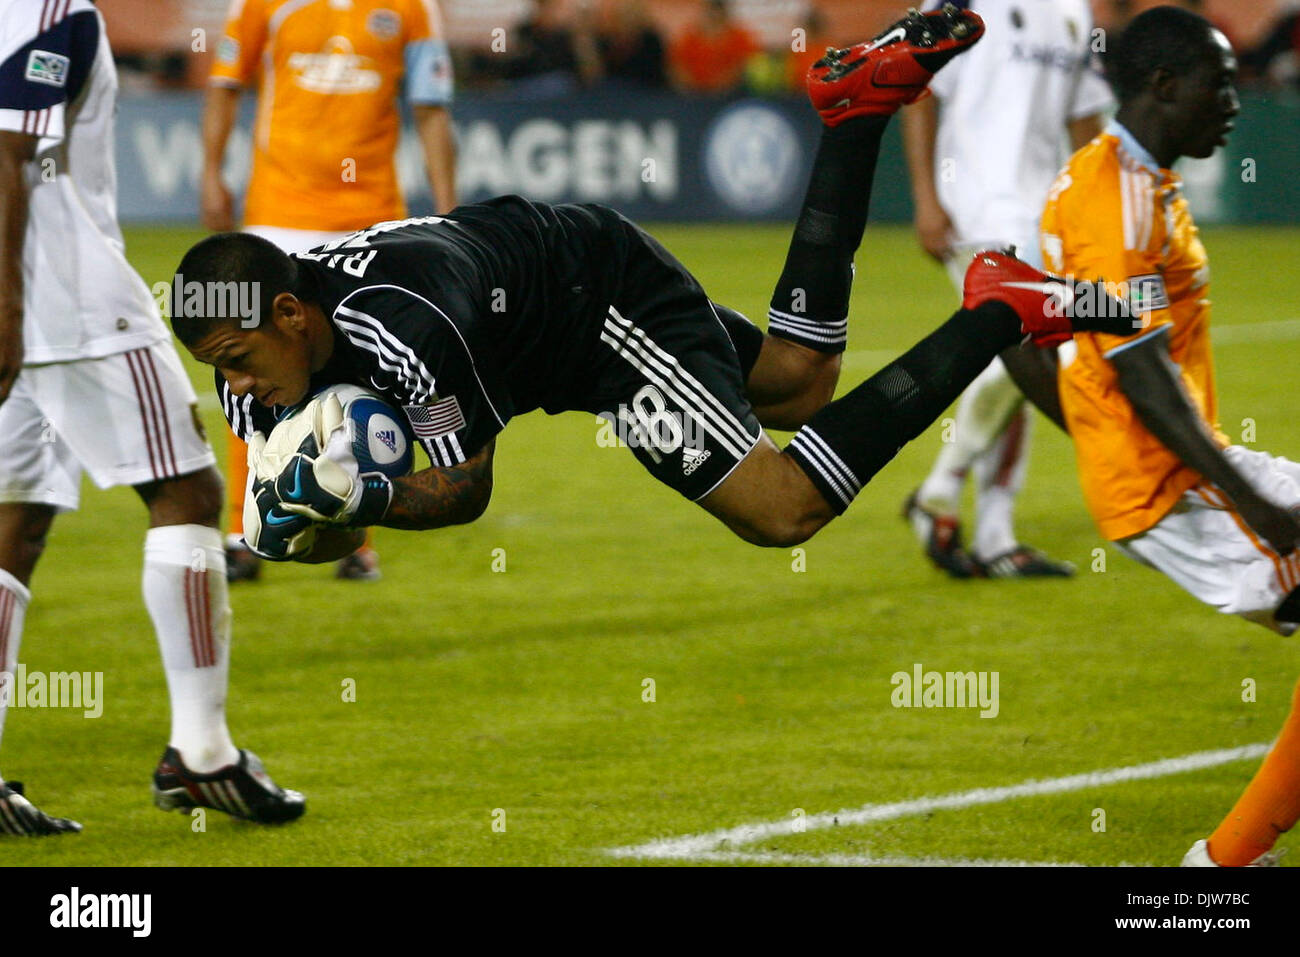 Nick Rimando (#18) for the Real Salt Lake snatches the ball and leaps over the Houston Dynamo.  With two back to back penalty kicks in the second half, the Houston Dynamo defeated Real Salt Lake 2-1 at Robertson Stadium in Houston, TX. (Credit Image: © Anthony Vasser/Southcreek Global/ZUMApress.com) Stock Photo